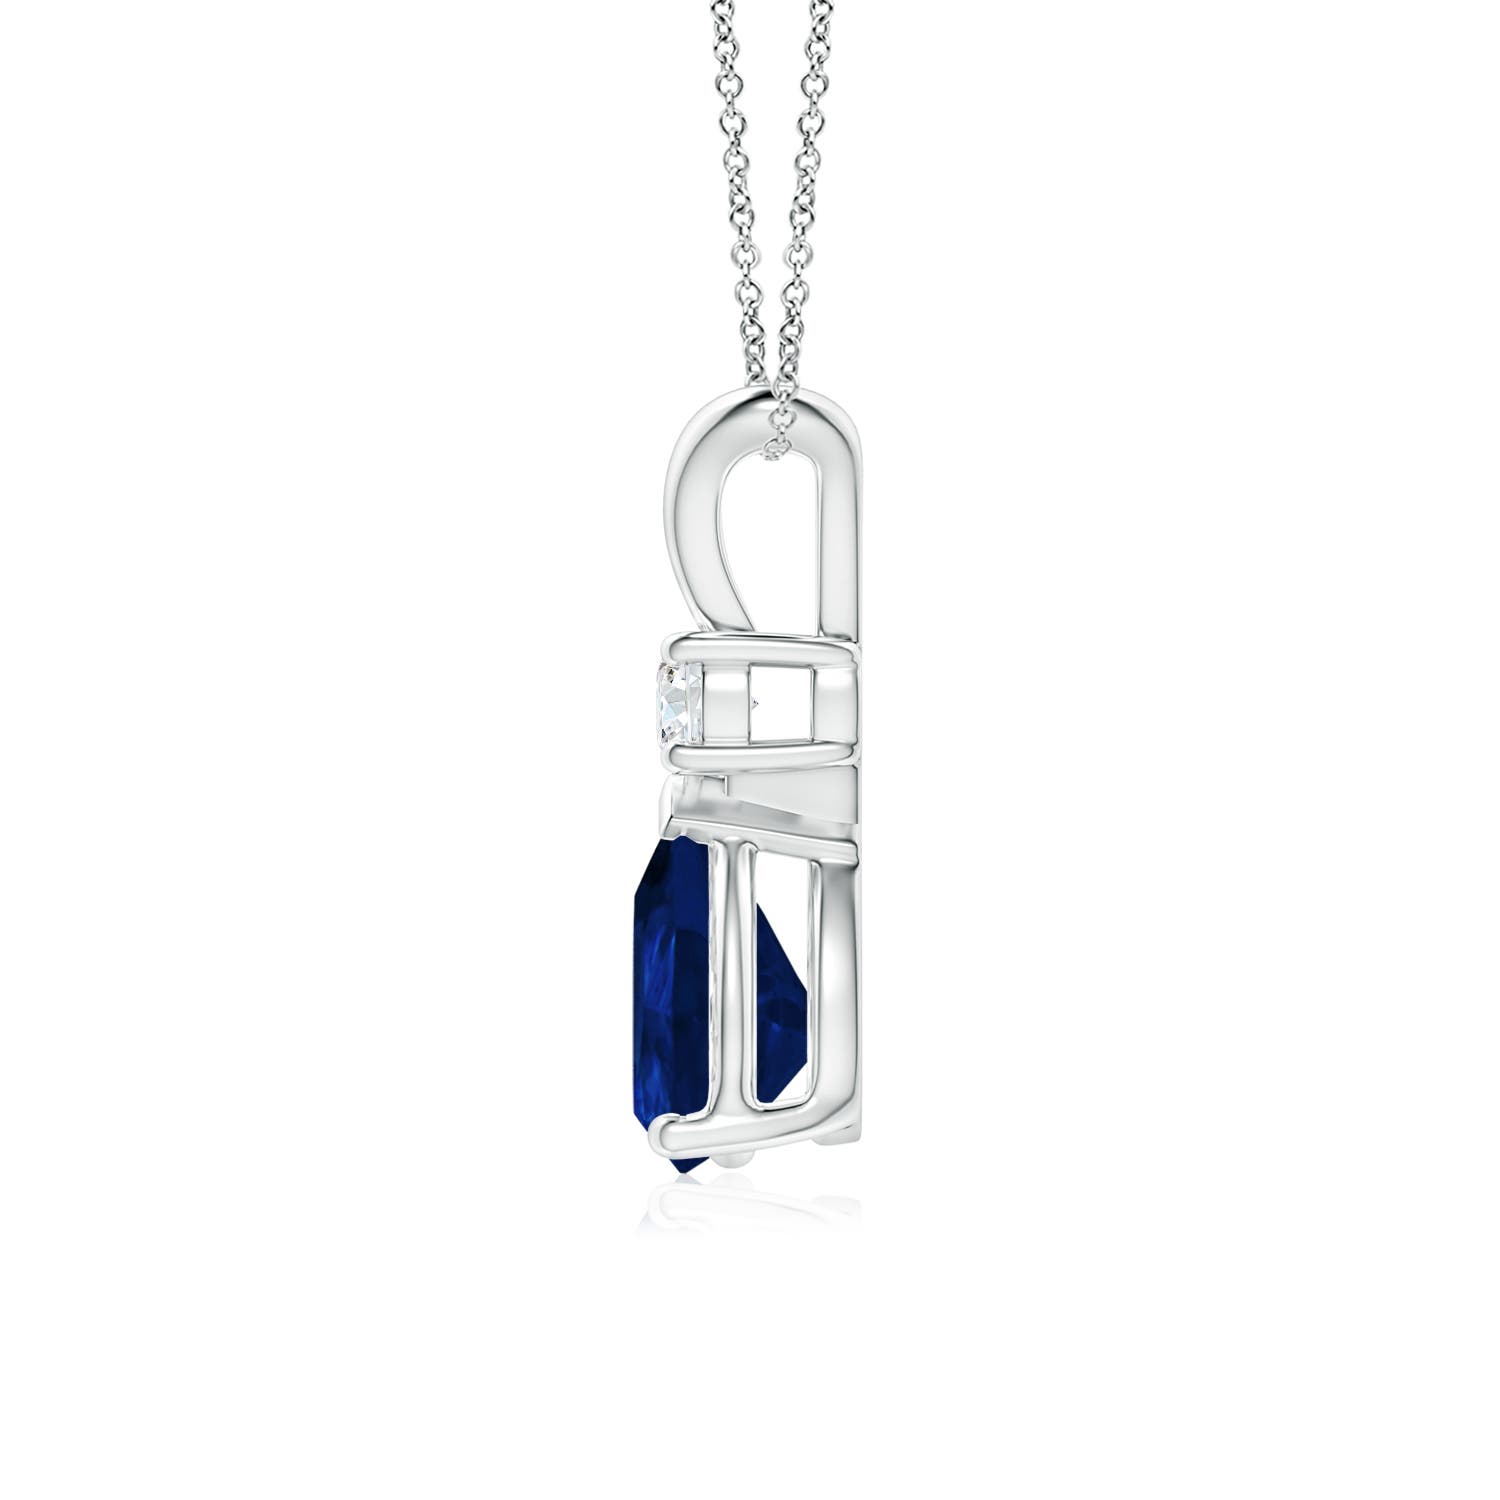 AA- Blue Sapphire / 1.26 CT / 14 KT White Gold